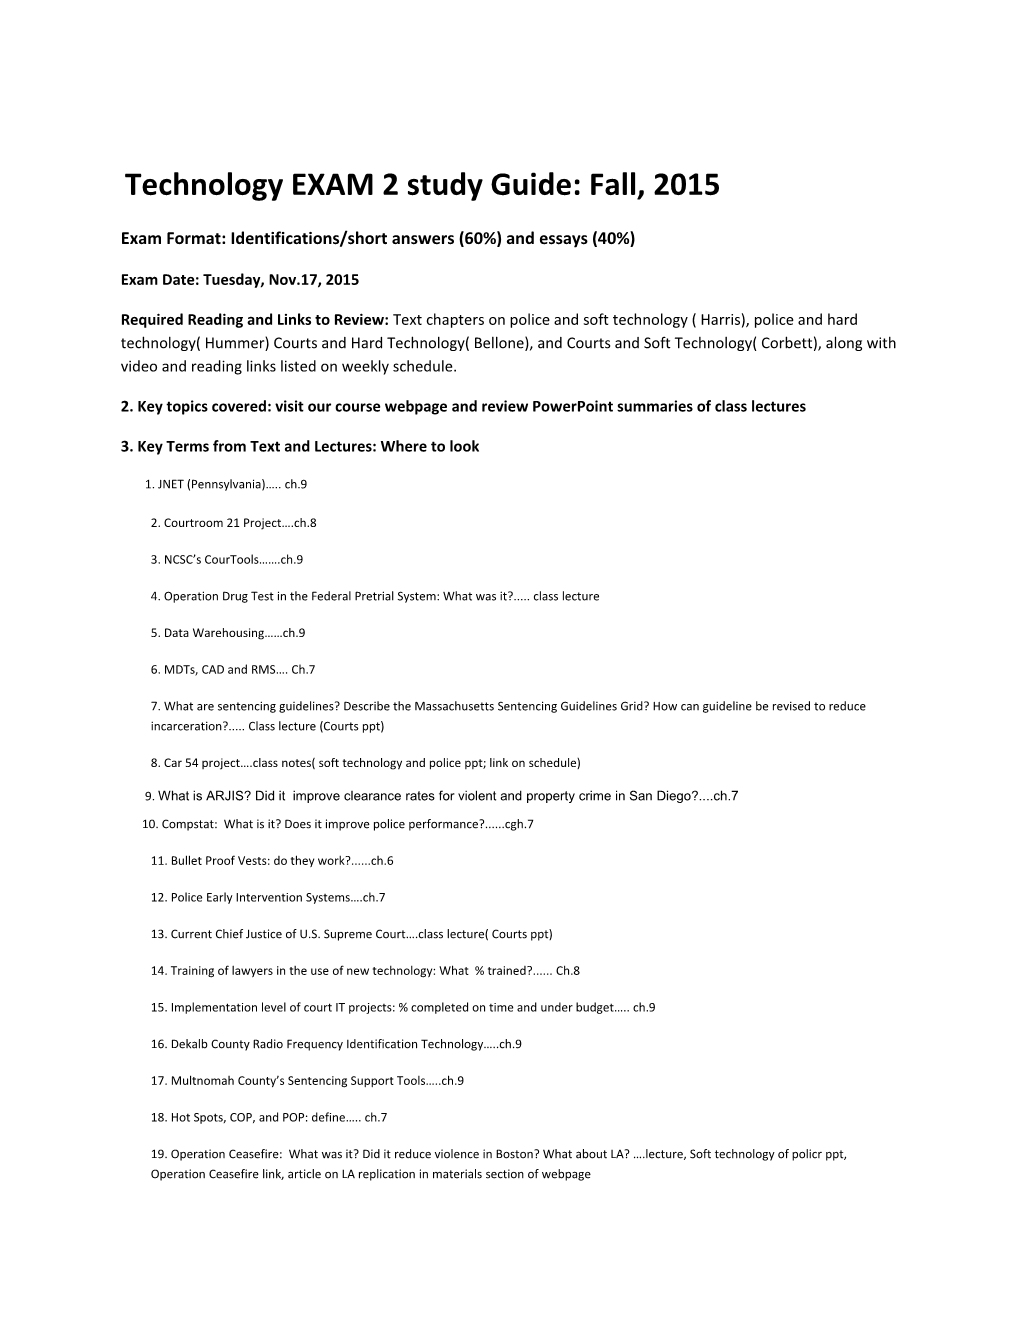 Study Guide for Exam 3: Technology and the Courts Spring 2010 Professor Byrne s1